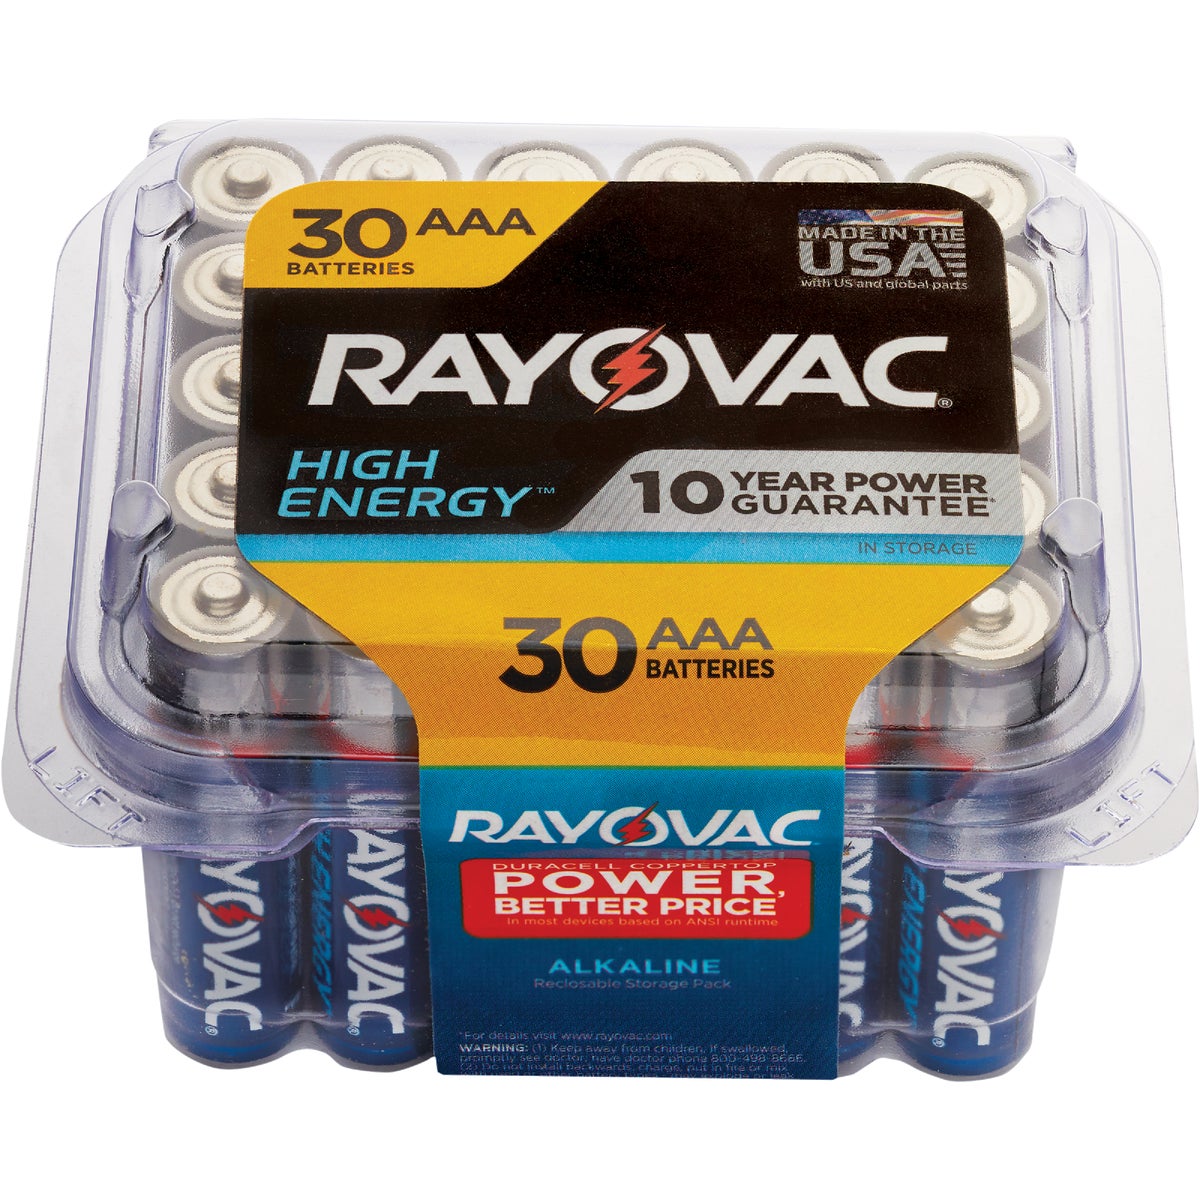 Item 800563, Power your household with Rayovac High Energy AAA Alkaline Batteries.